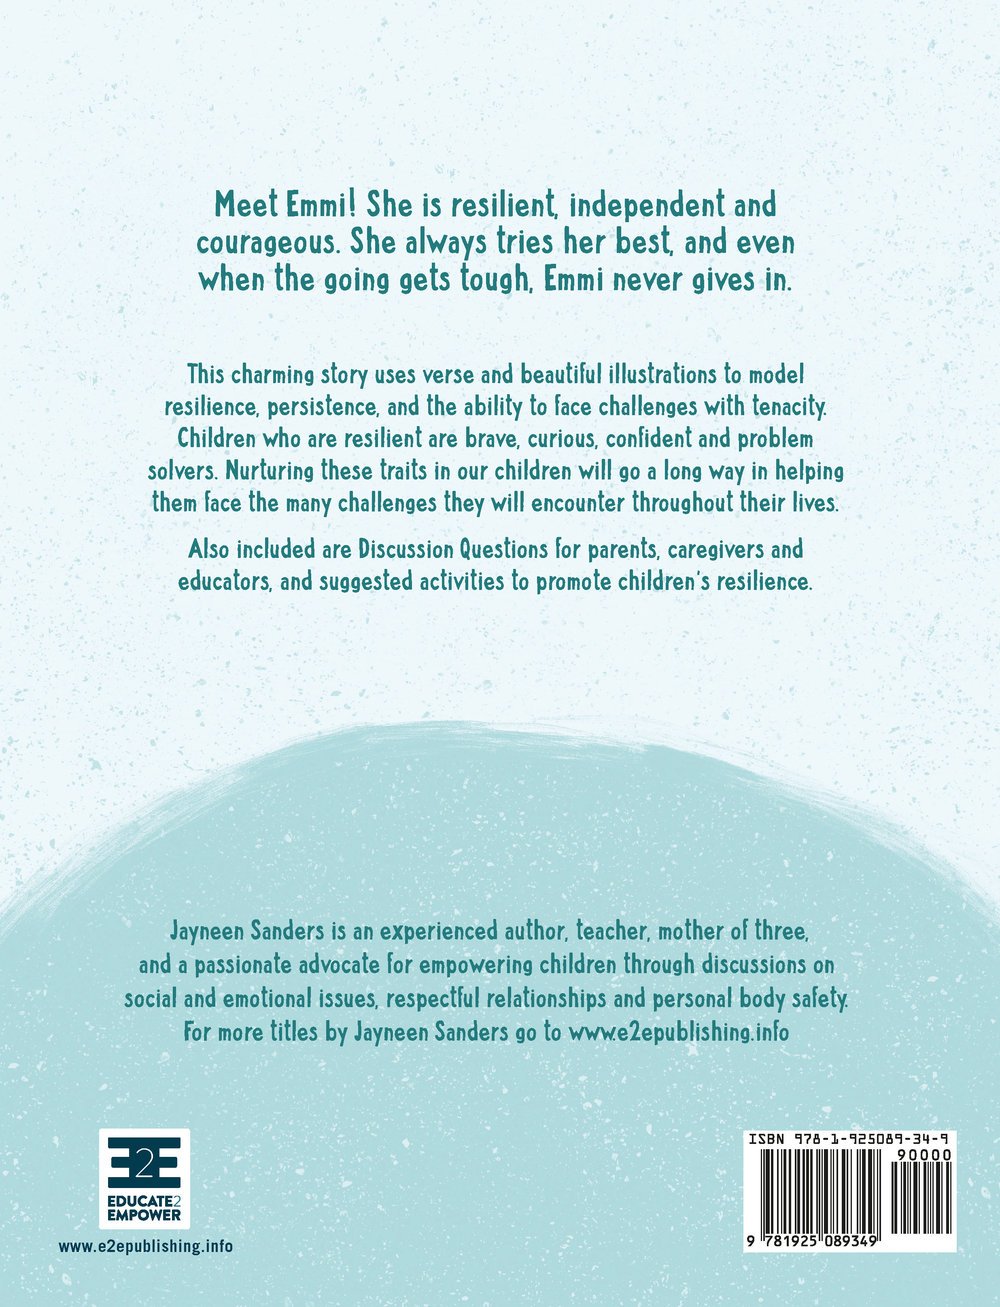 The back cover of the book ‘Resilience’ by Jayneen Sanders.